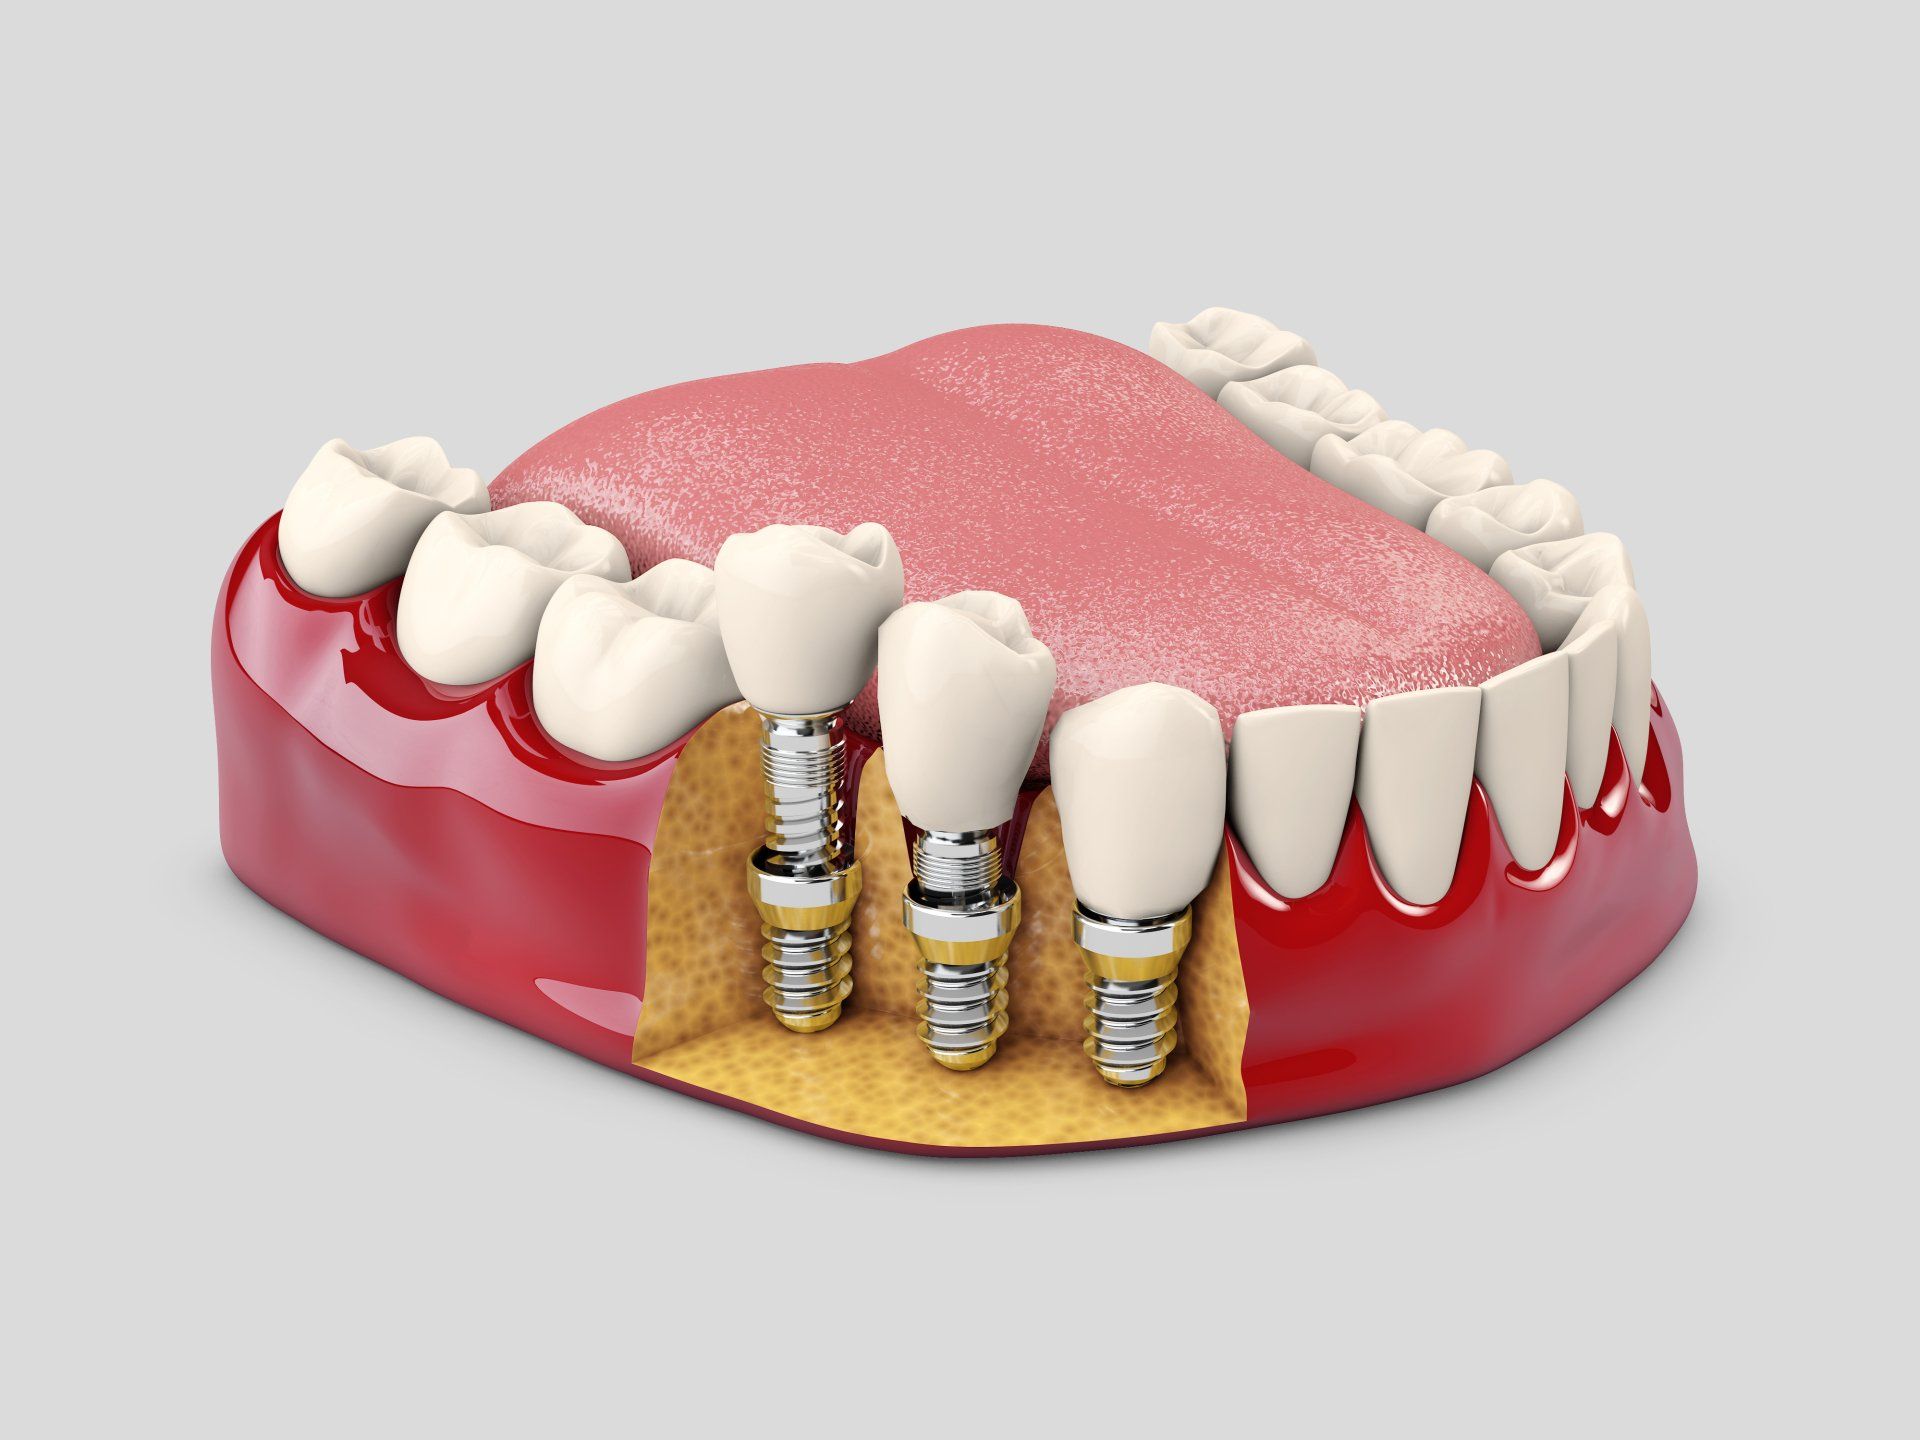 model of dental implants showing how they work